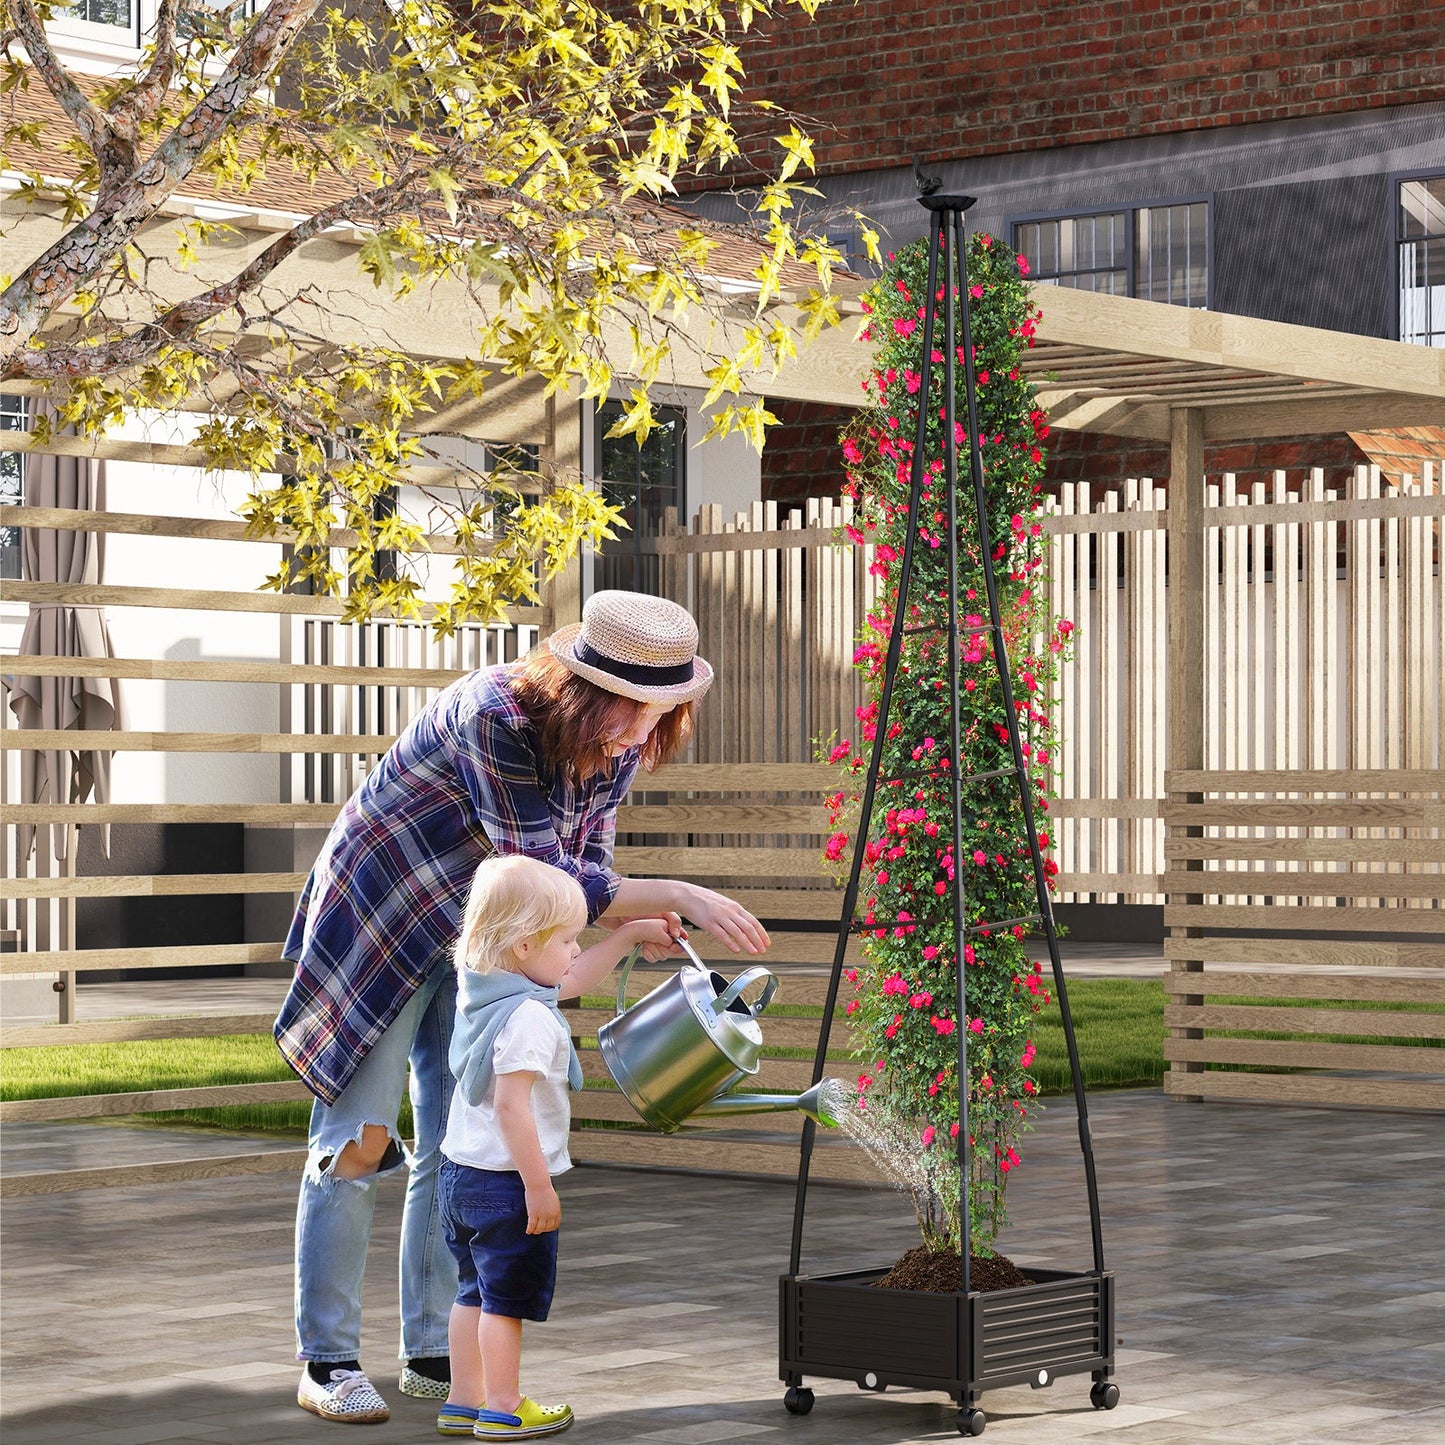 Garden Obelisk Trellis with Self-Drainage System for Climbing Plants, Black at Gallery Canada